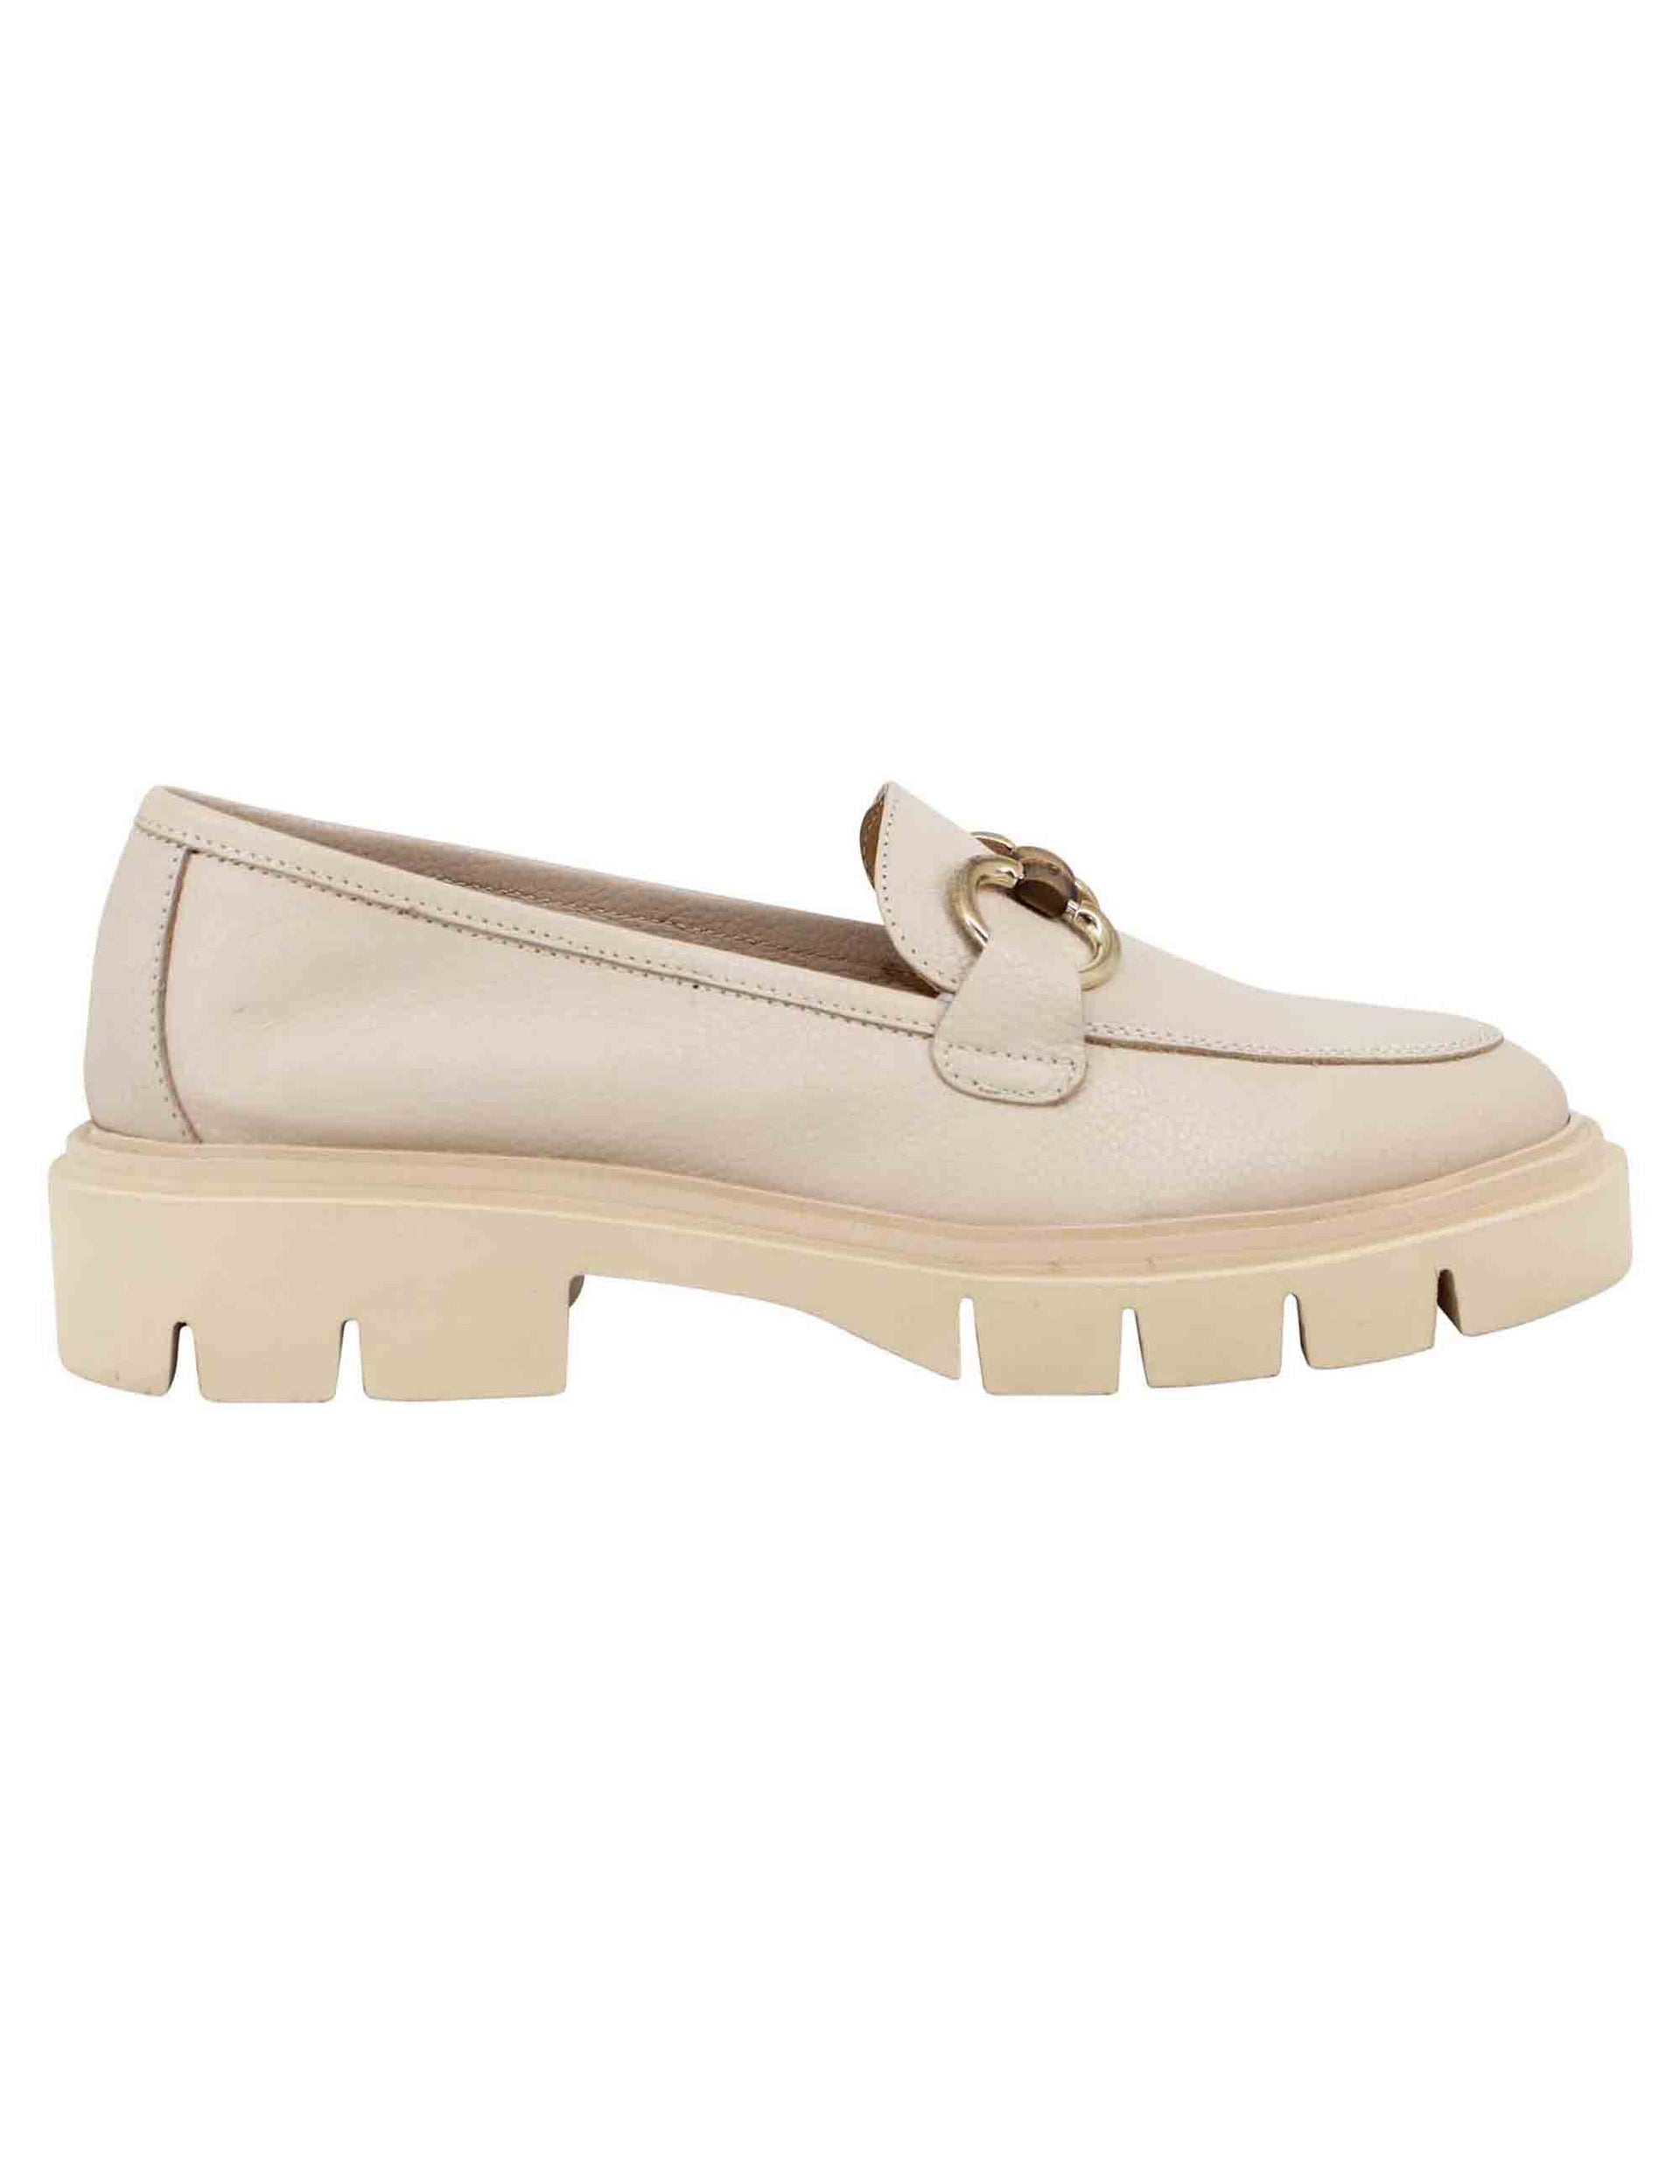 Women's beige leather moccasins with light lug sole